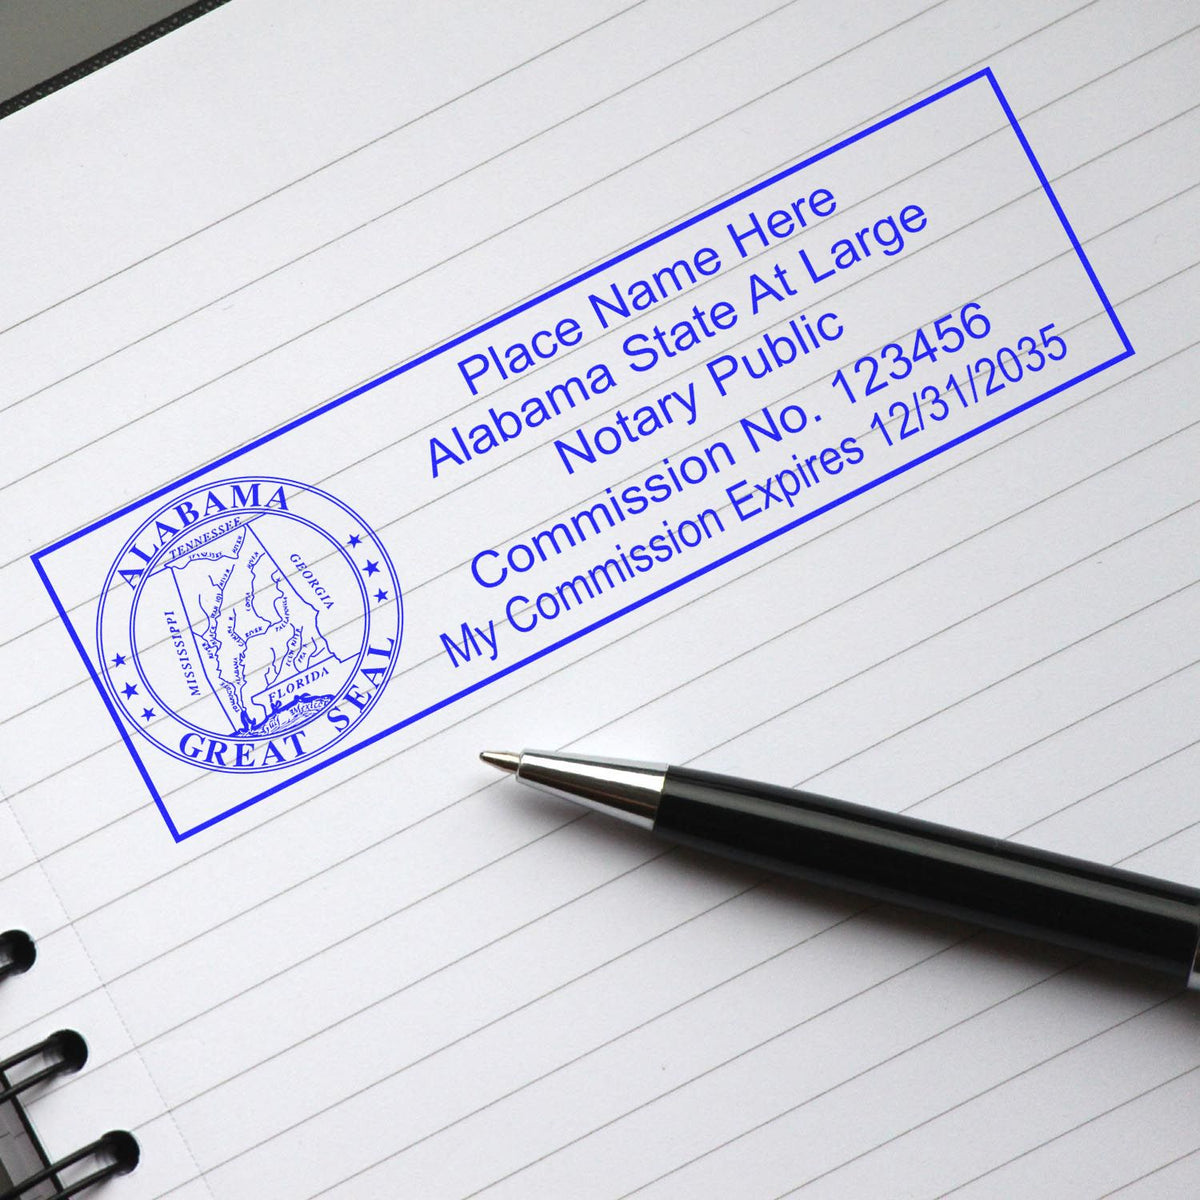 The MaxLight Premium Pre-Inked Alabama State Seal Notarial Stamp stamp impression comes to life with a crisp, detailed photo on paper - showcasing true professional quality.